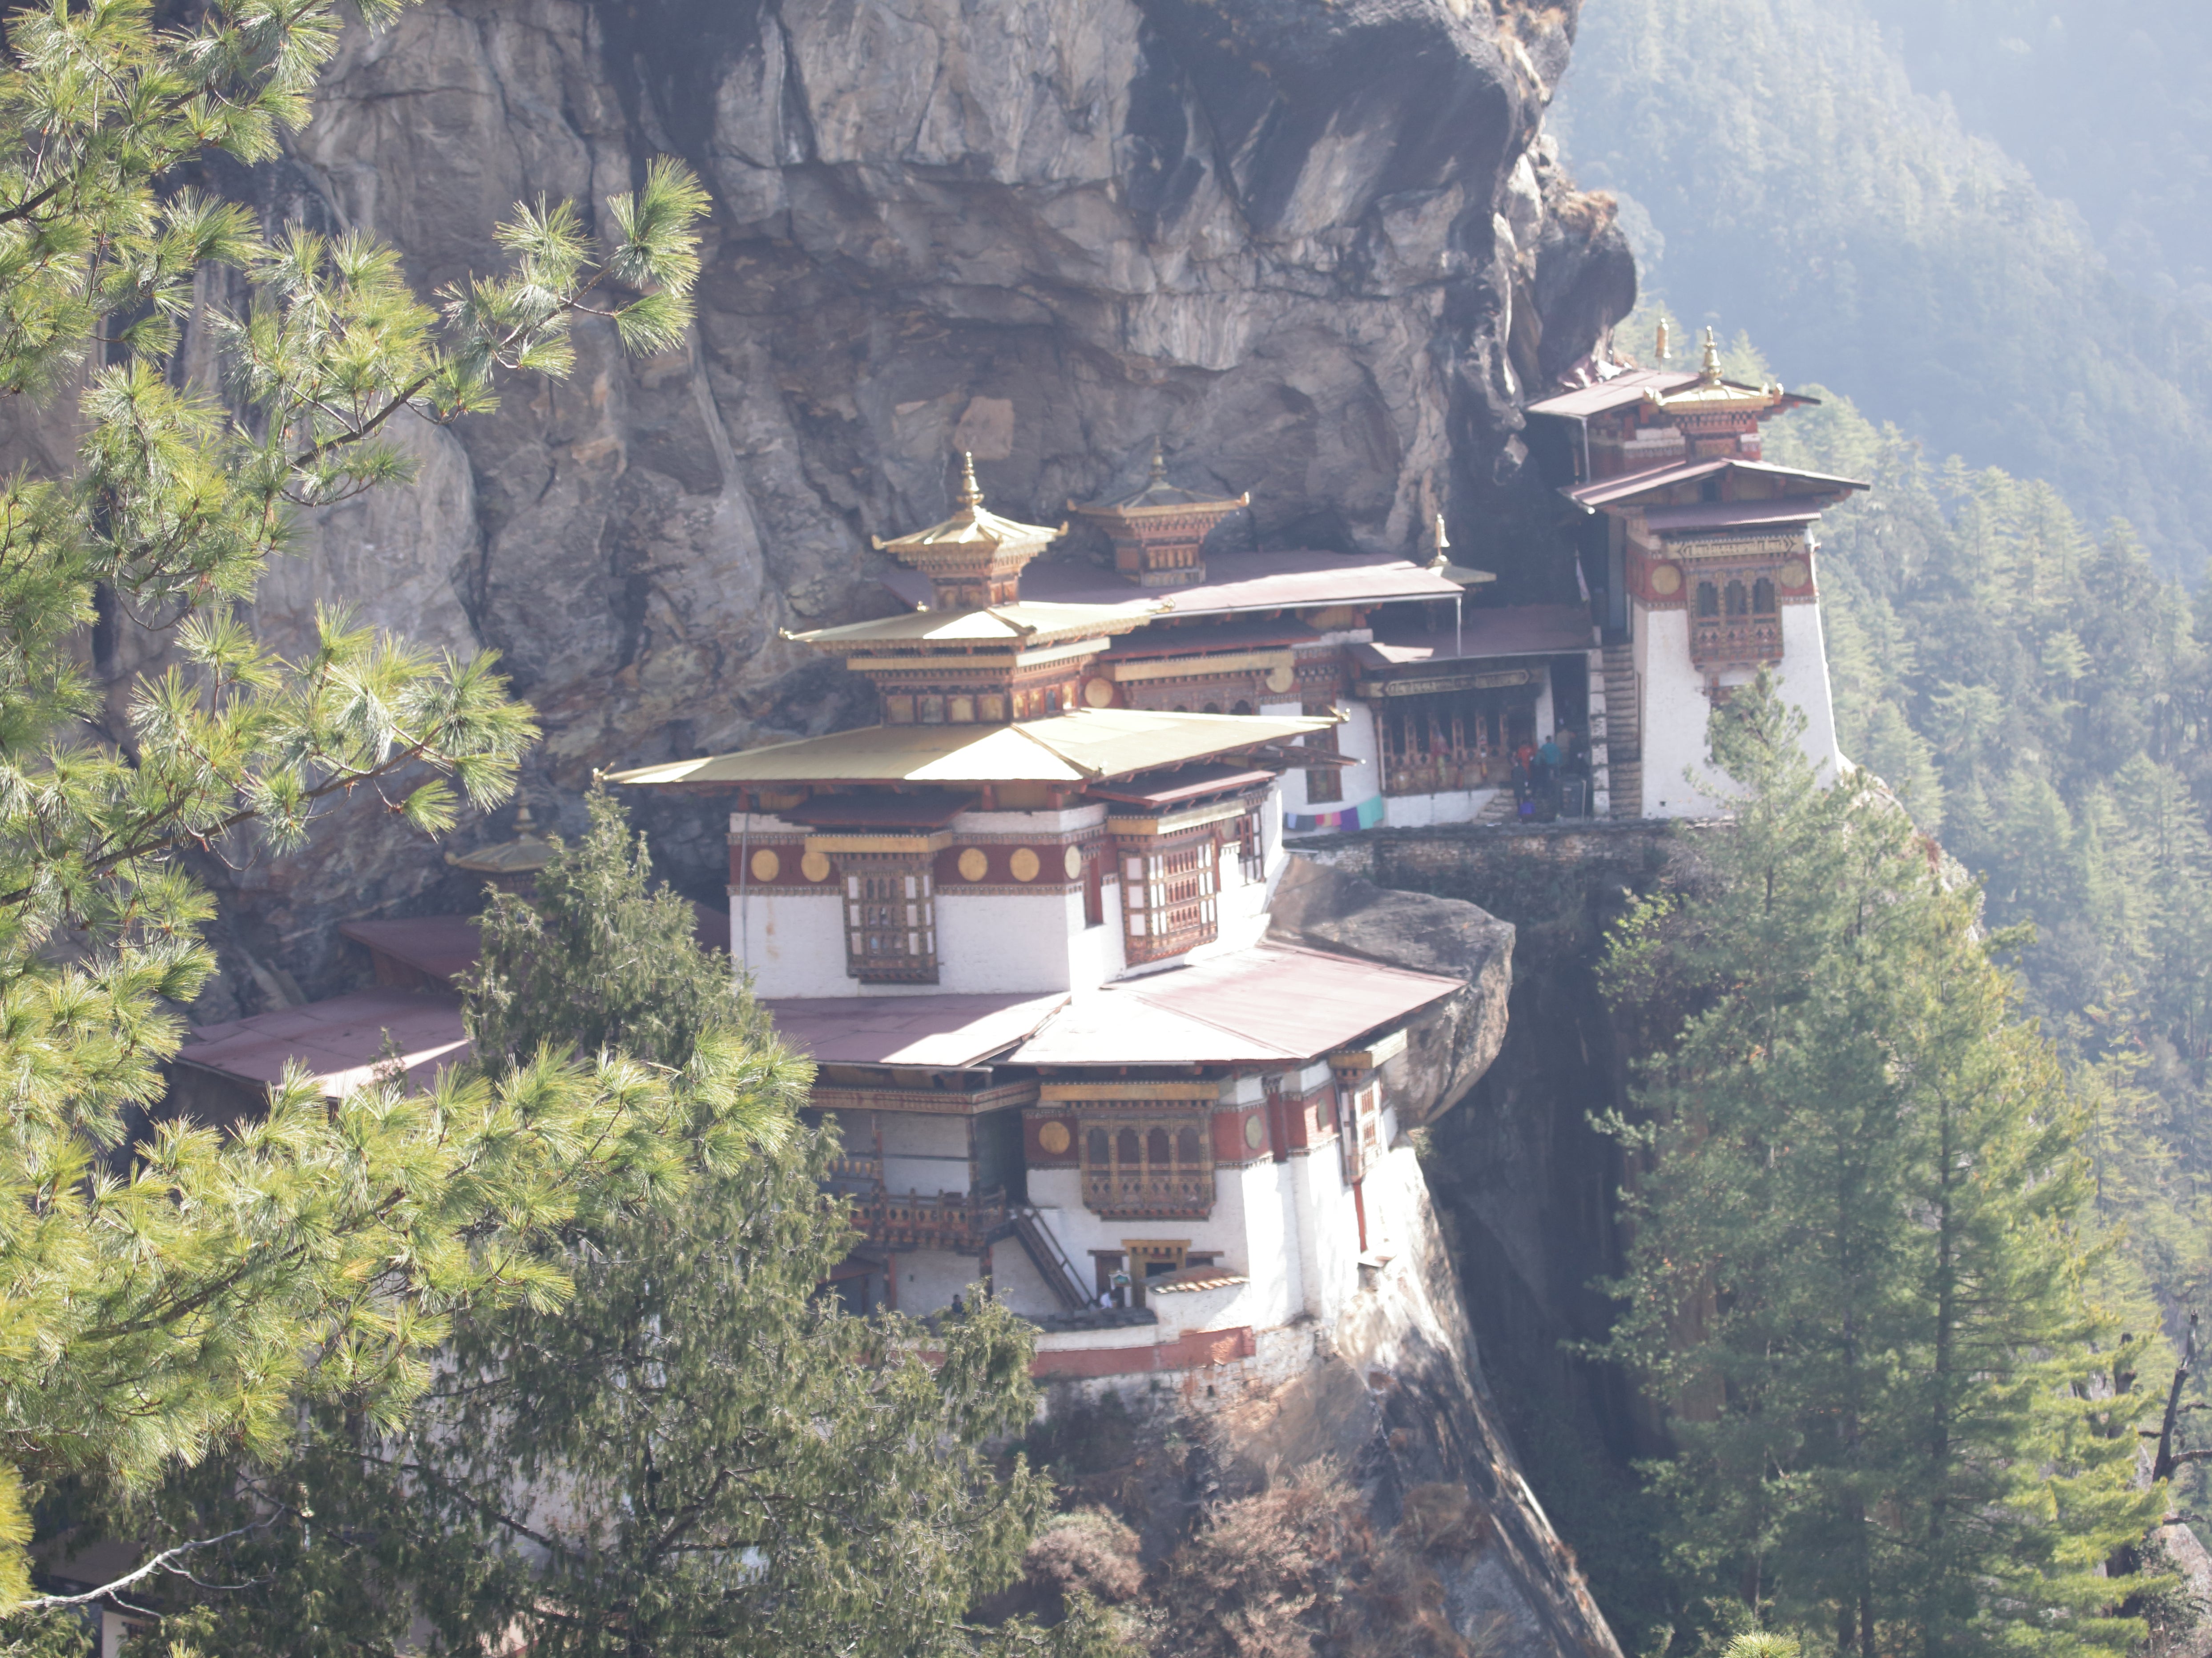 Taktshang Monastery clings to a cliff where a mythical flying tigress was said to have landed